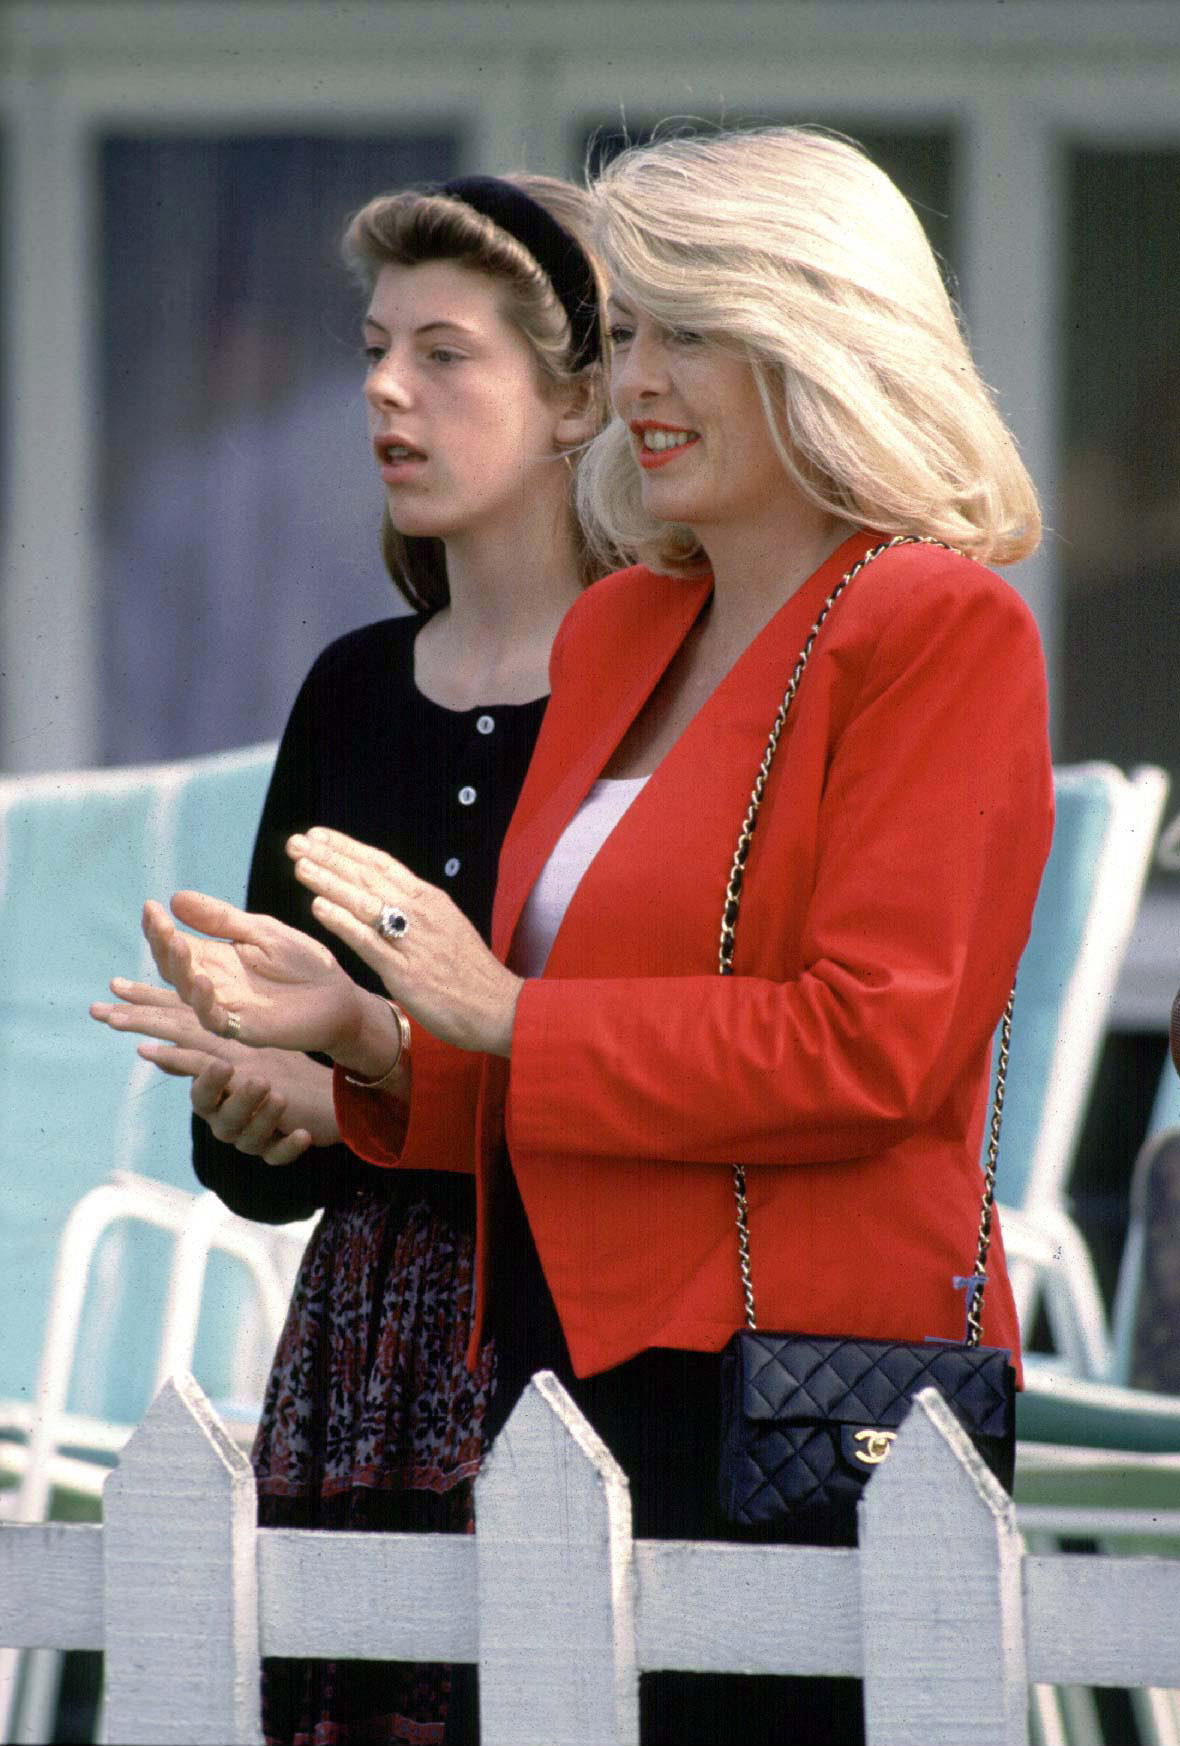 Lady Dale Tryon watching Prince Charles at Smiths Lawn, Windsor with her daughter Zoe on September 22, 1990| Source: Getty Images